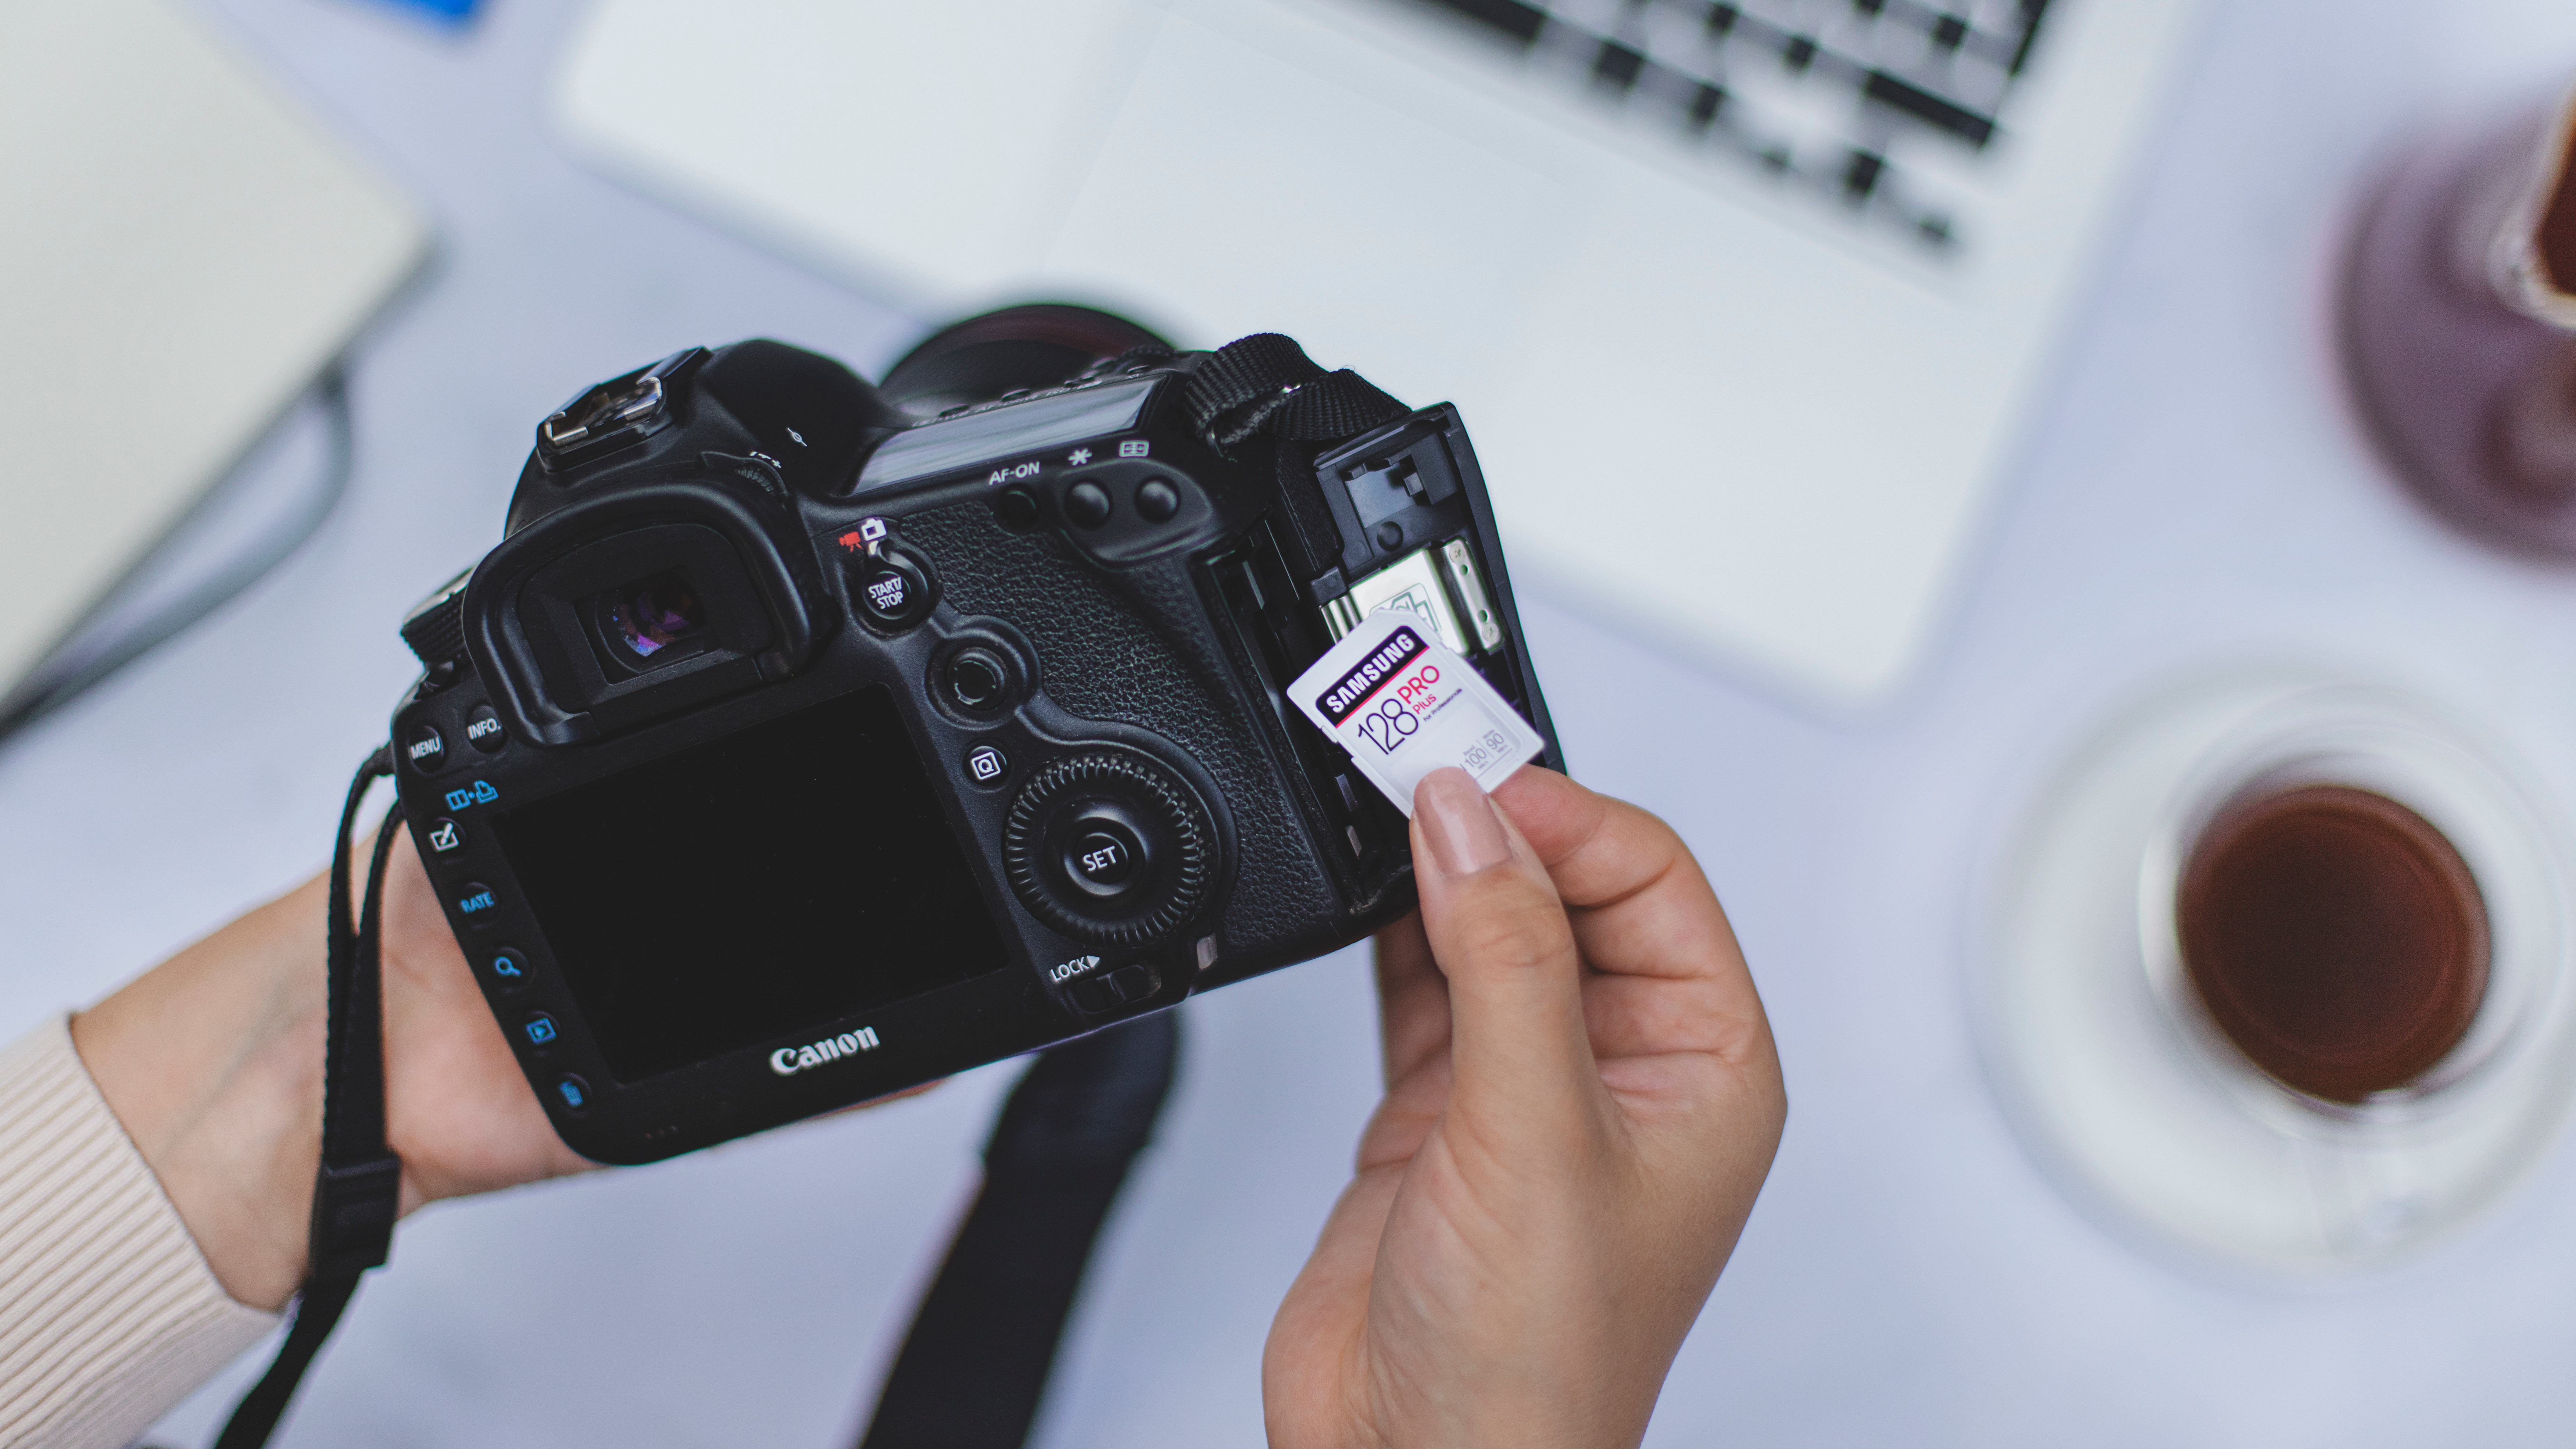 The best memory cards for your camera